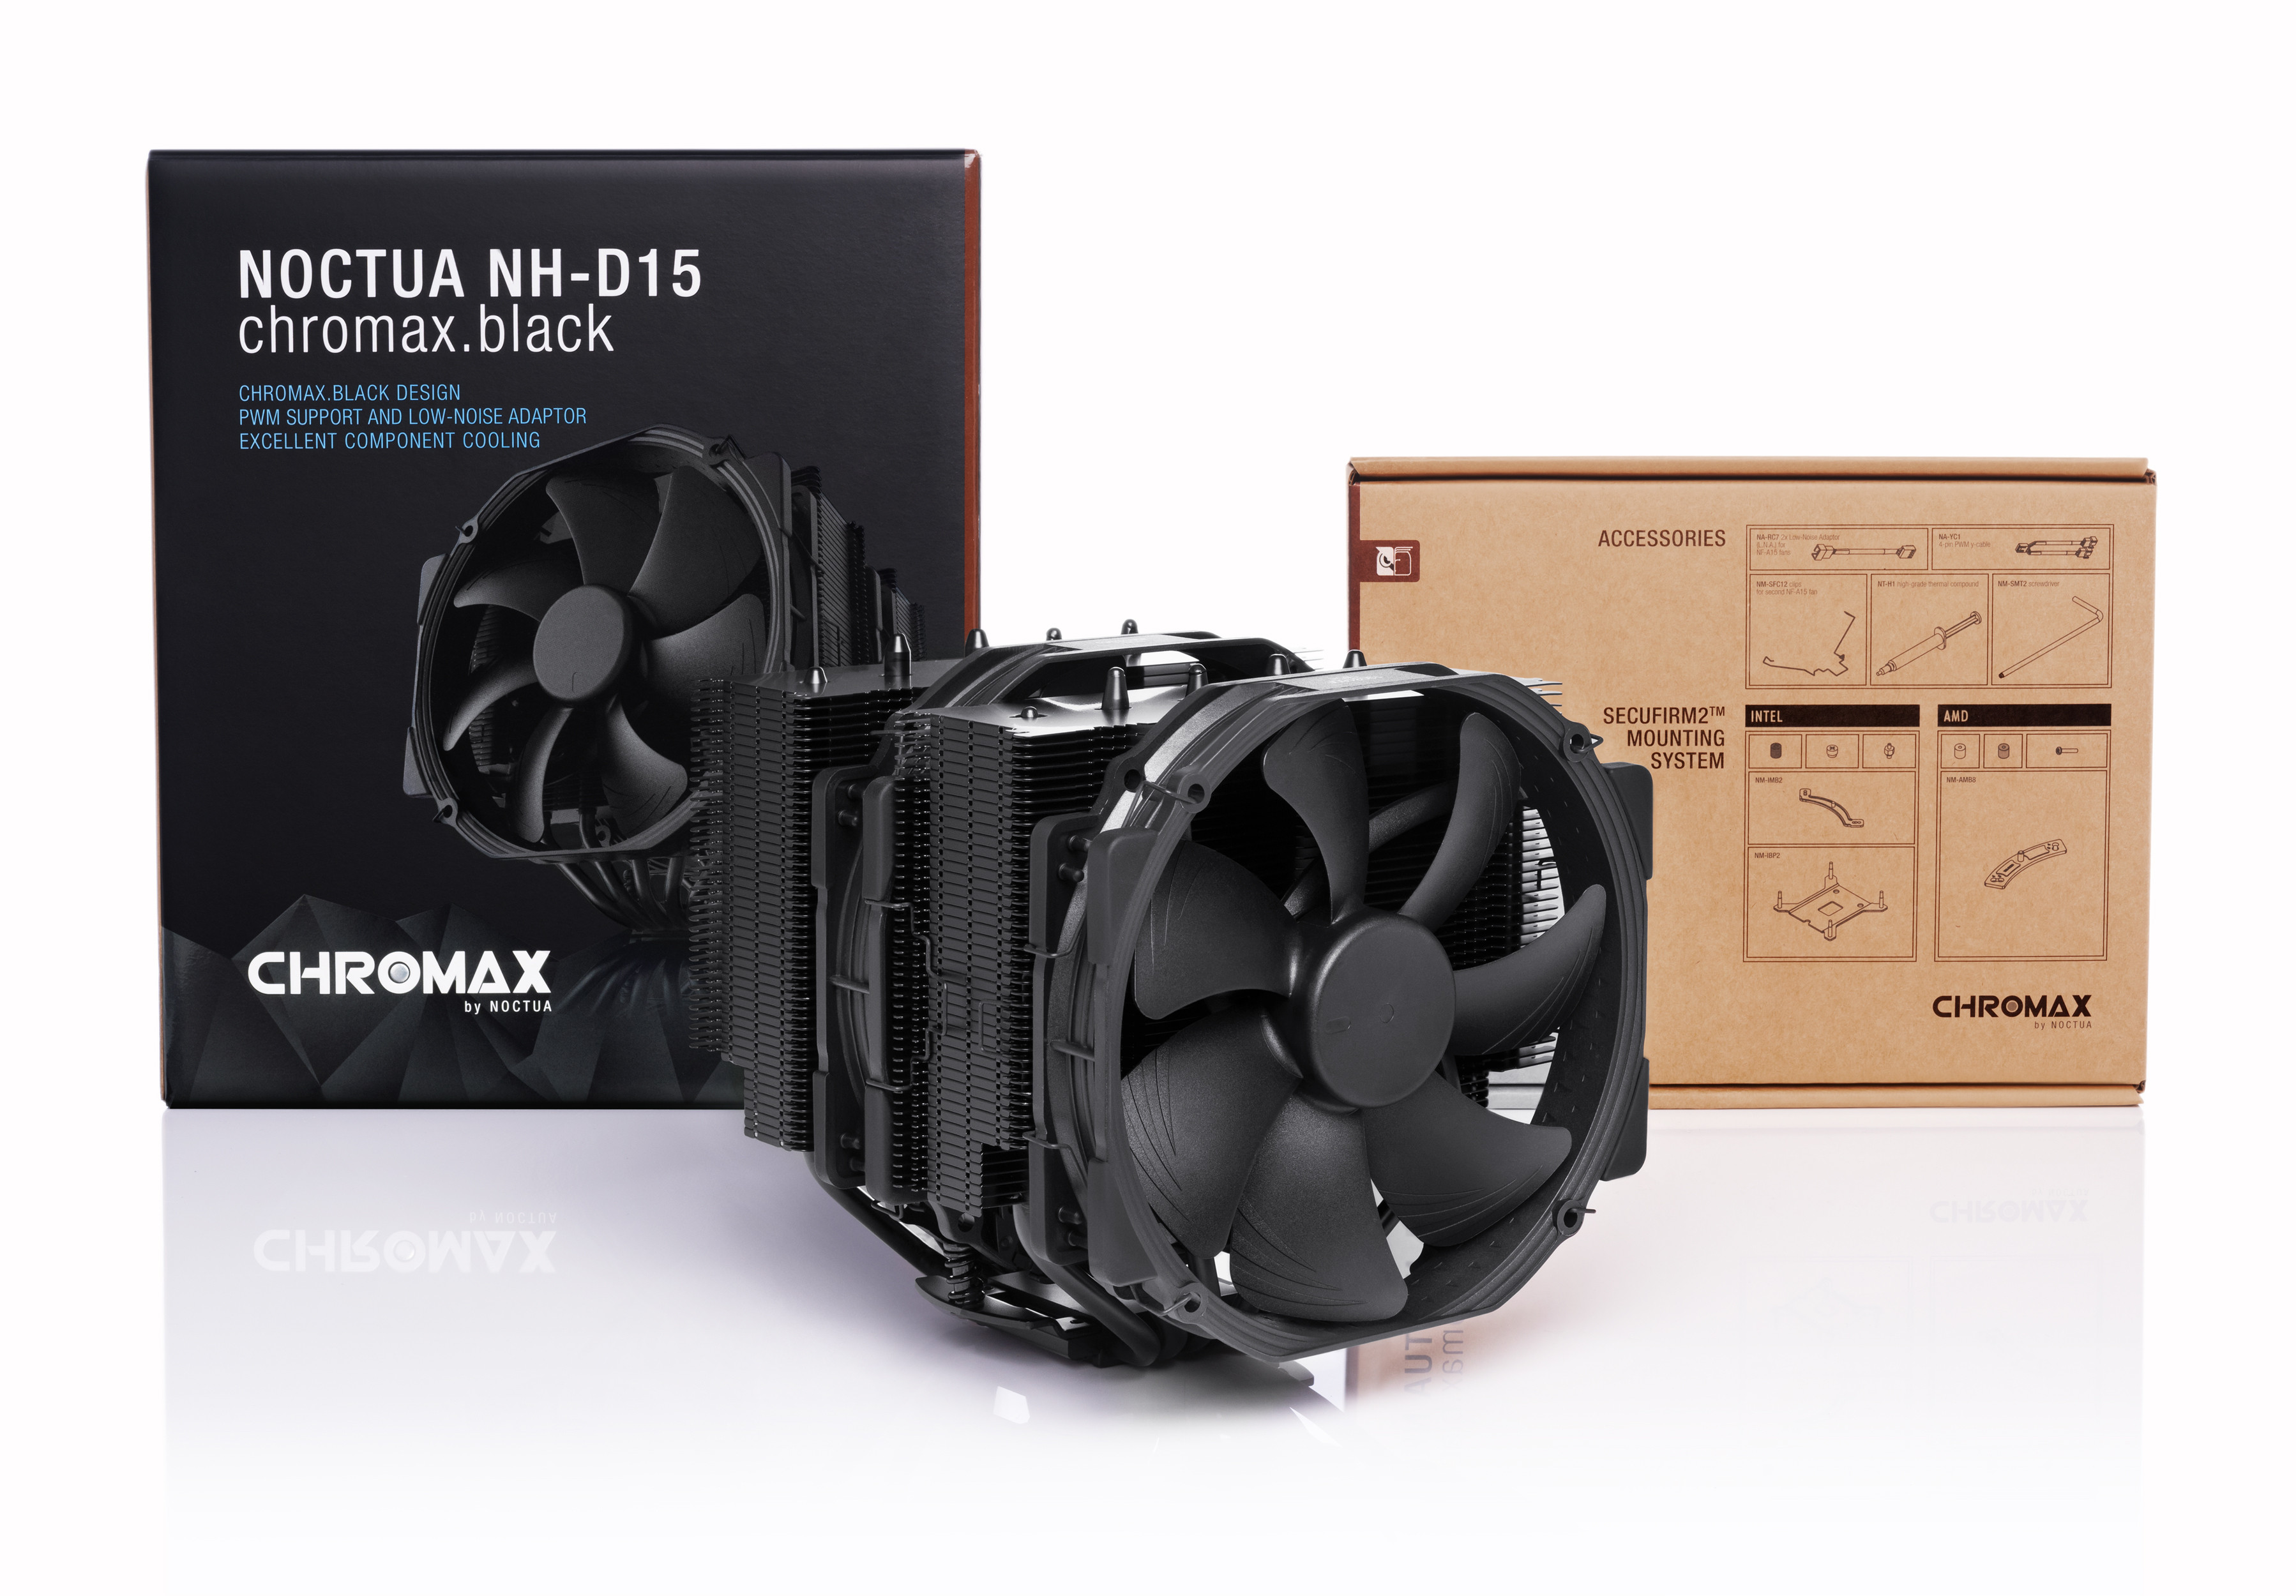 Most of Noctua's LGA115x-compatible coolers can also work with 